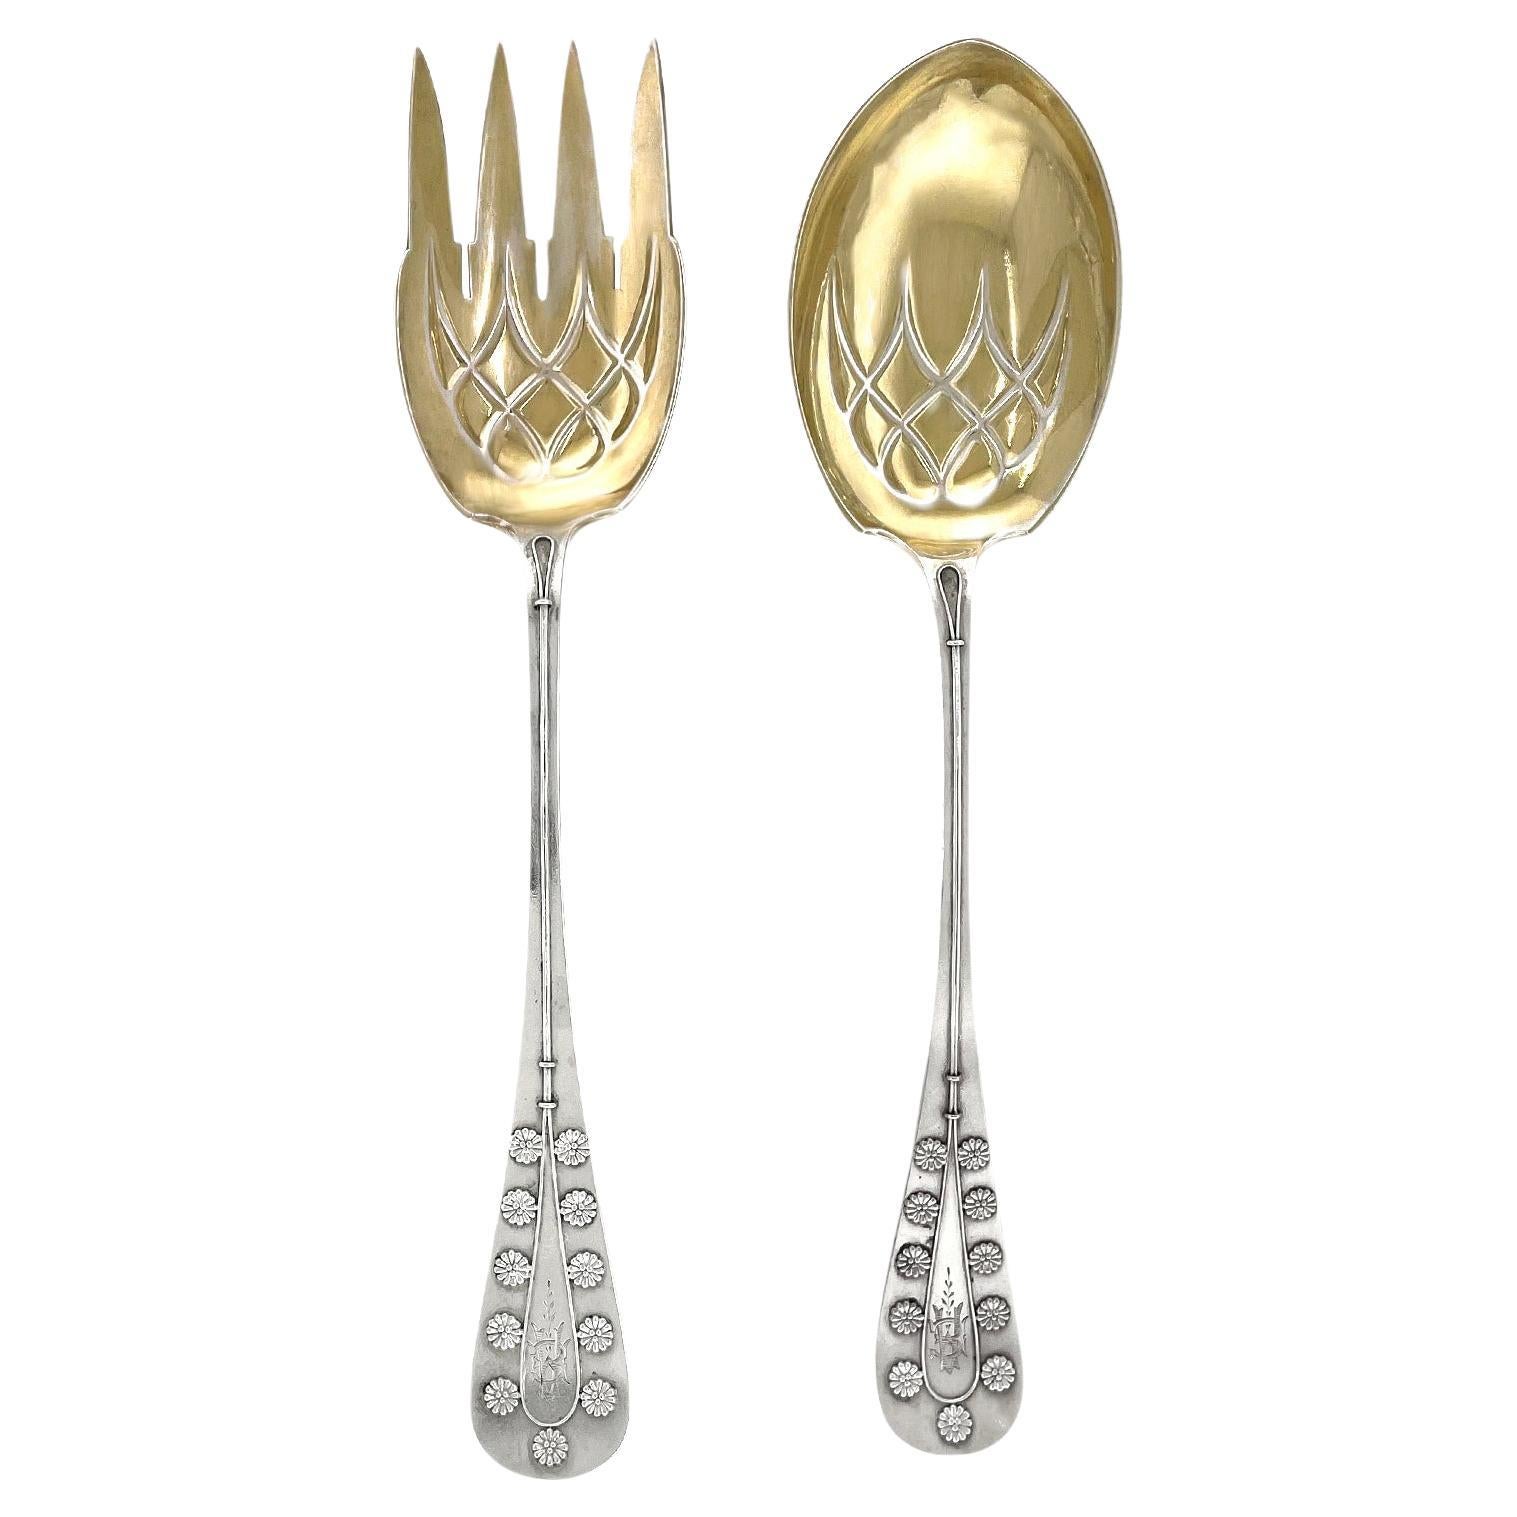 Tiffany "Daisy" Pattern Sterling Salad Set For Sale